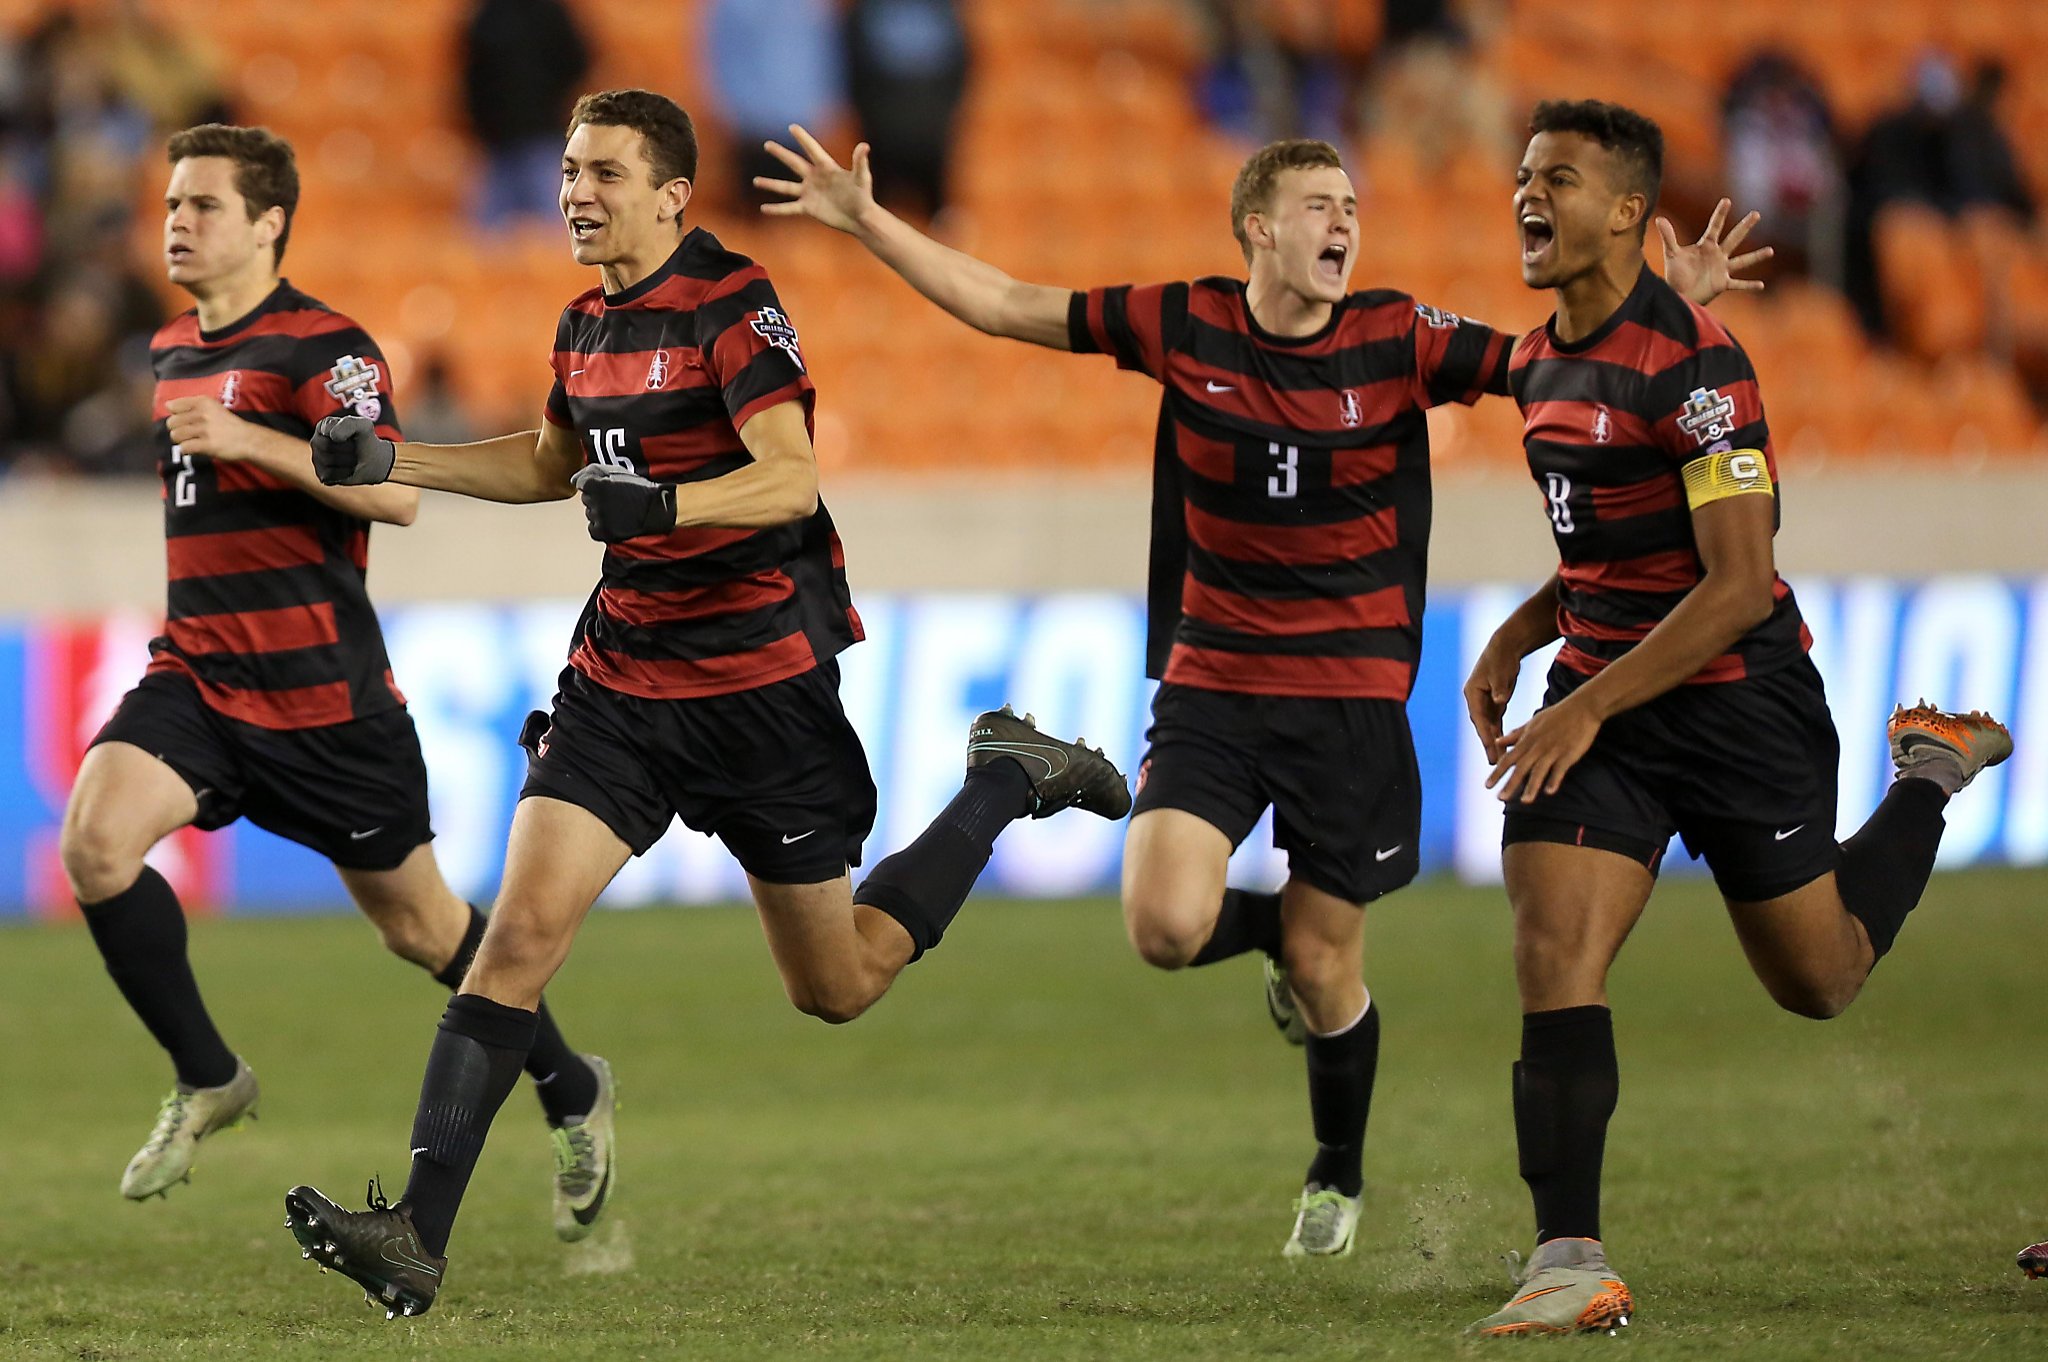 Stanford advances to College Cup final, 10for10 on PKs